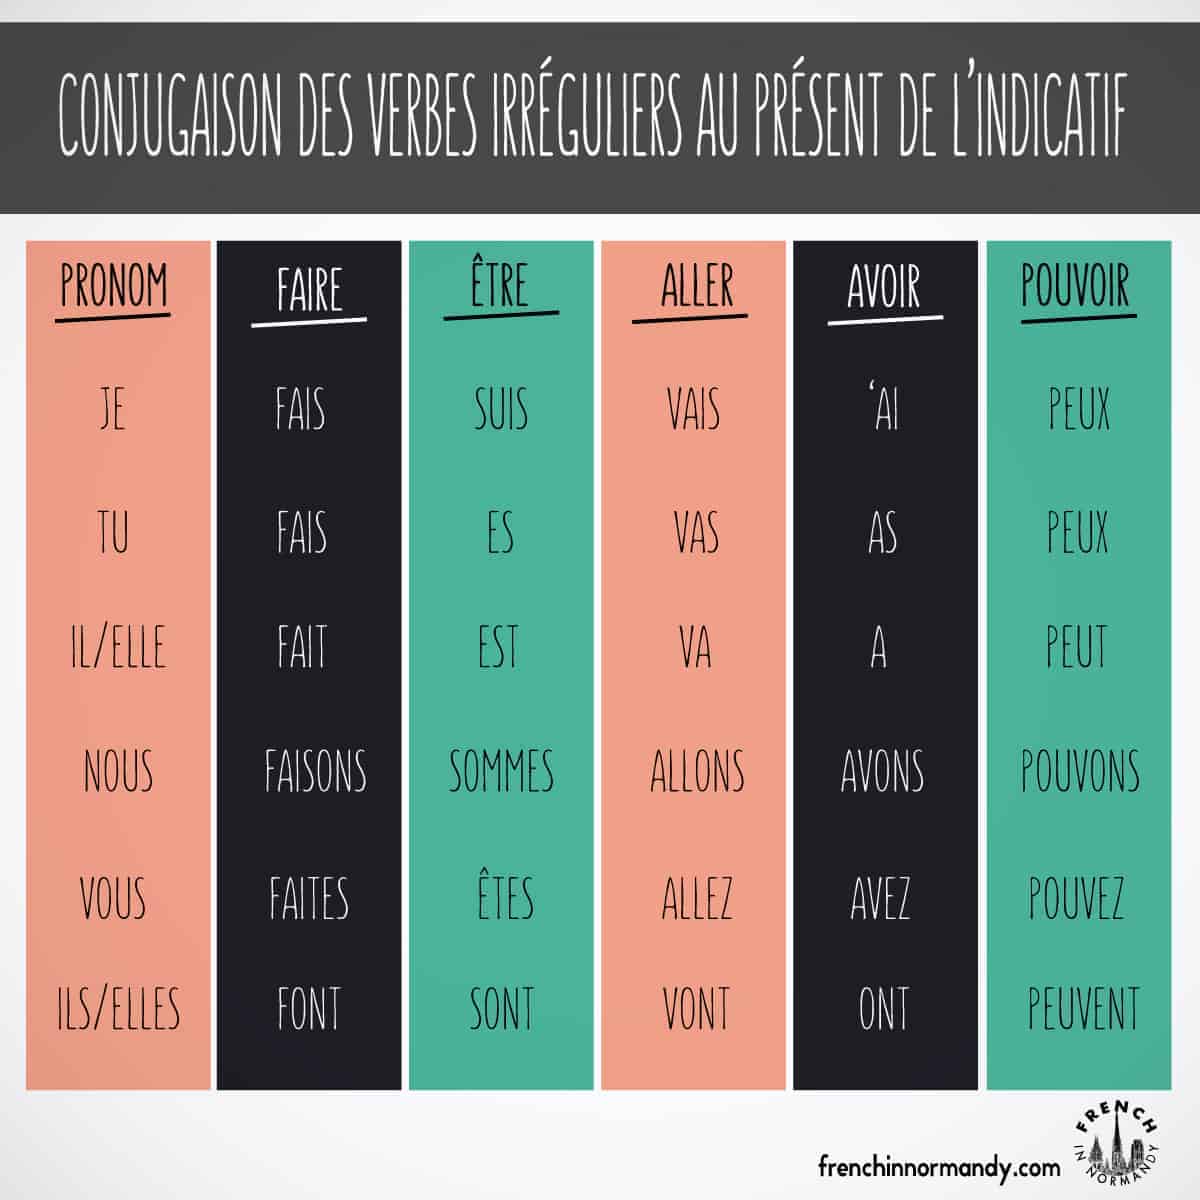 learn-french-8-conjugate-irregular-french-verbs